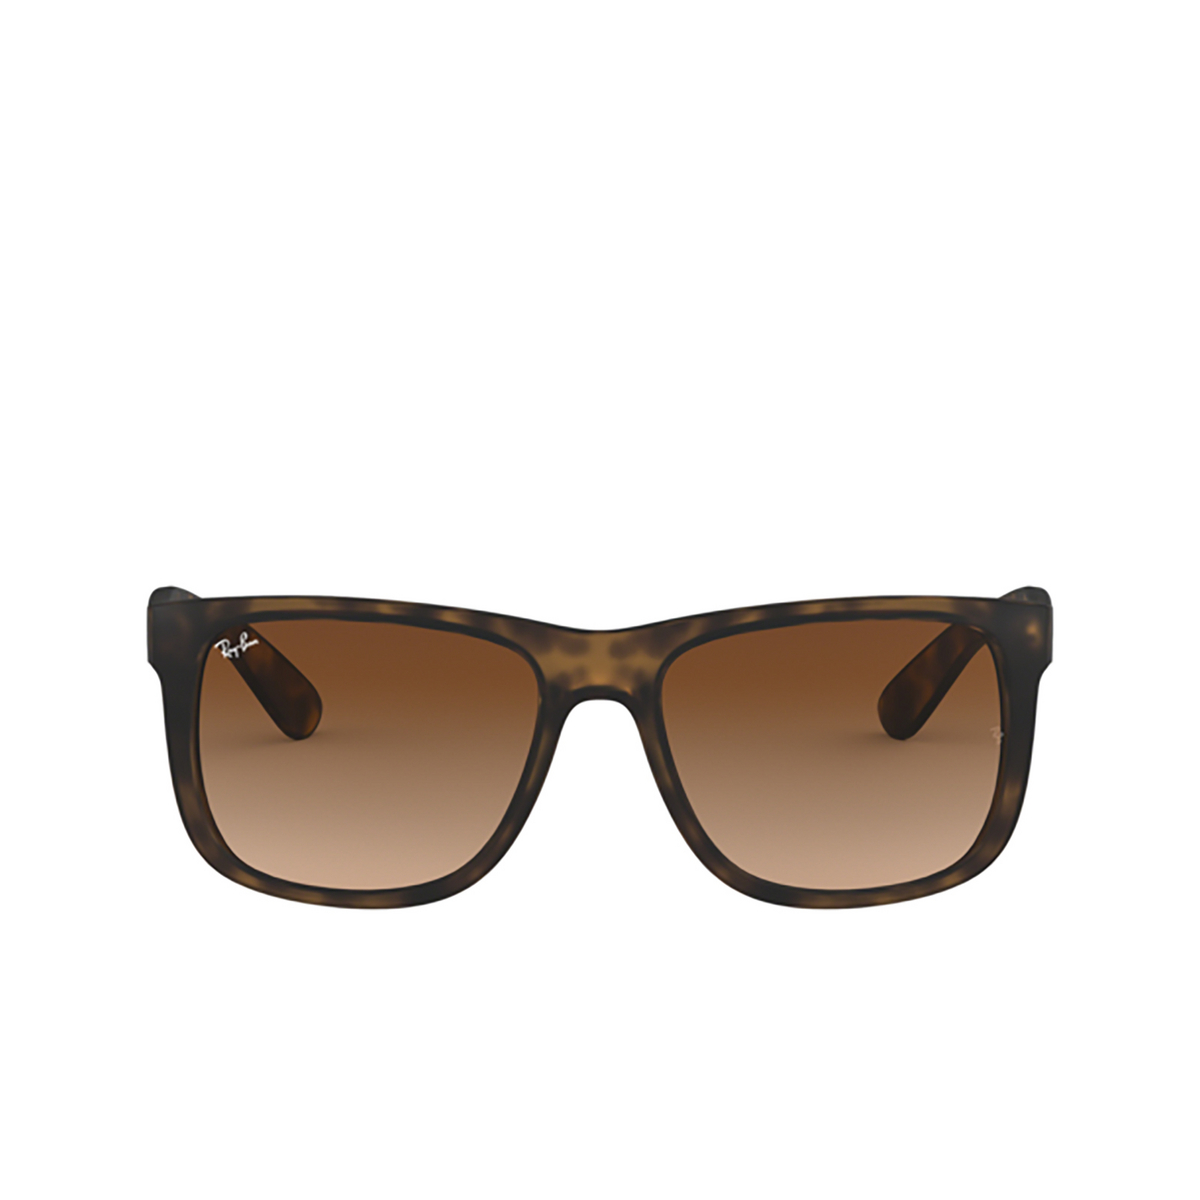 Ray-Ban JUSTIN Sunglasses 710/13 RUBBER LIGHT HAVANA - front view